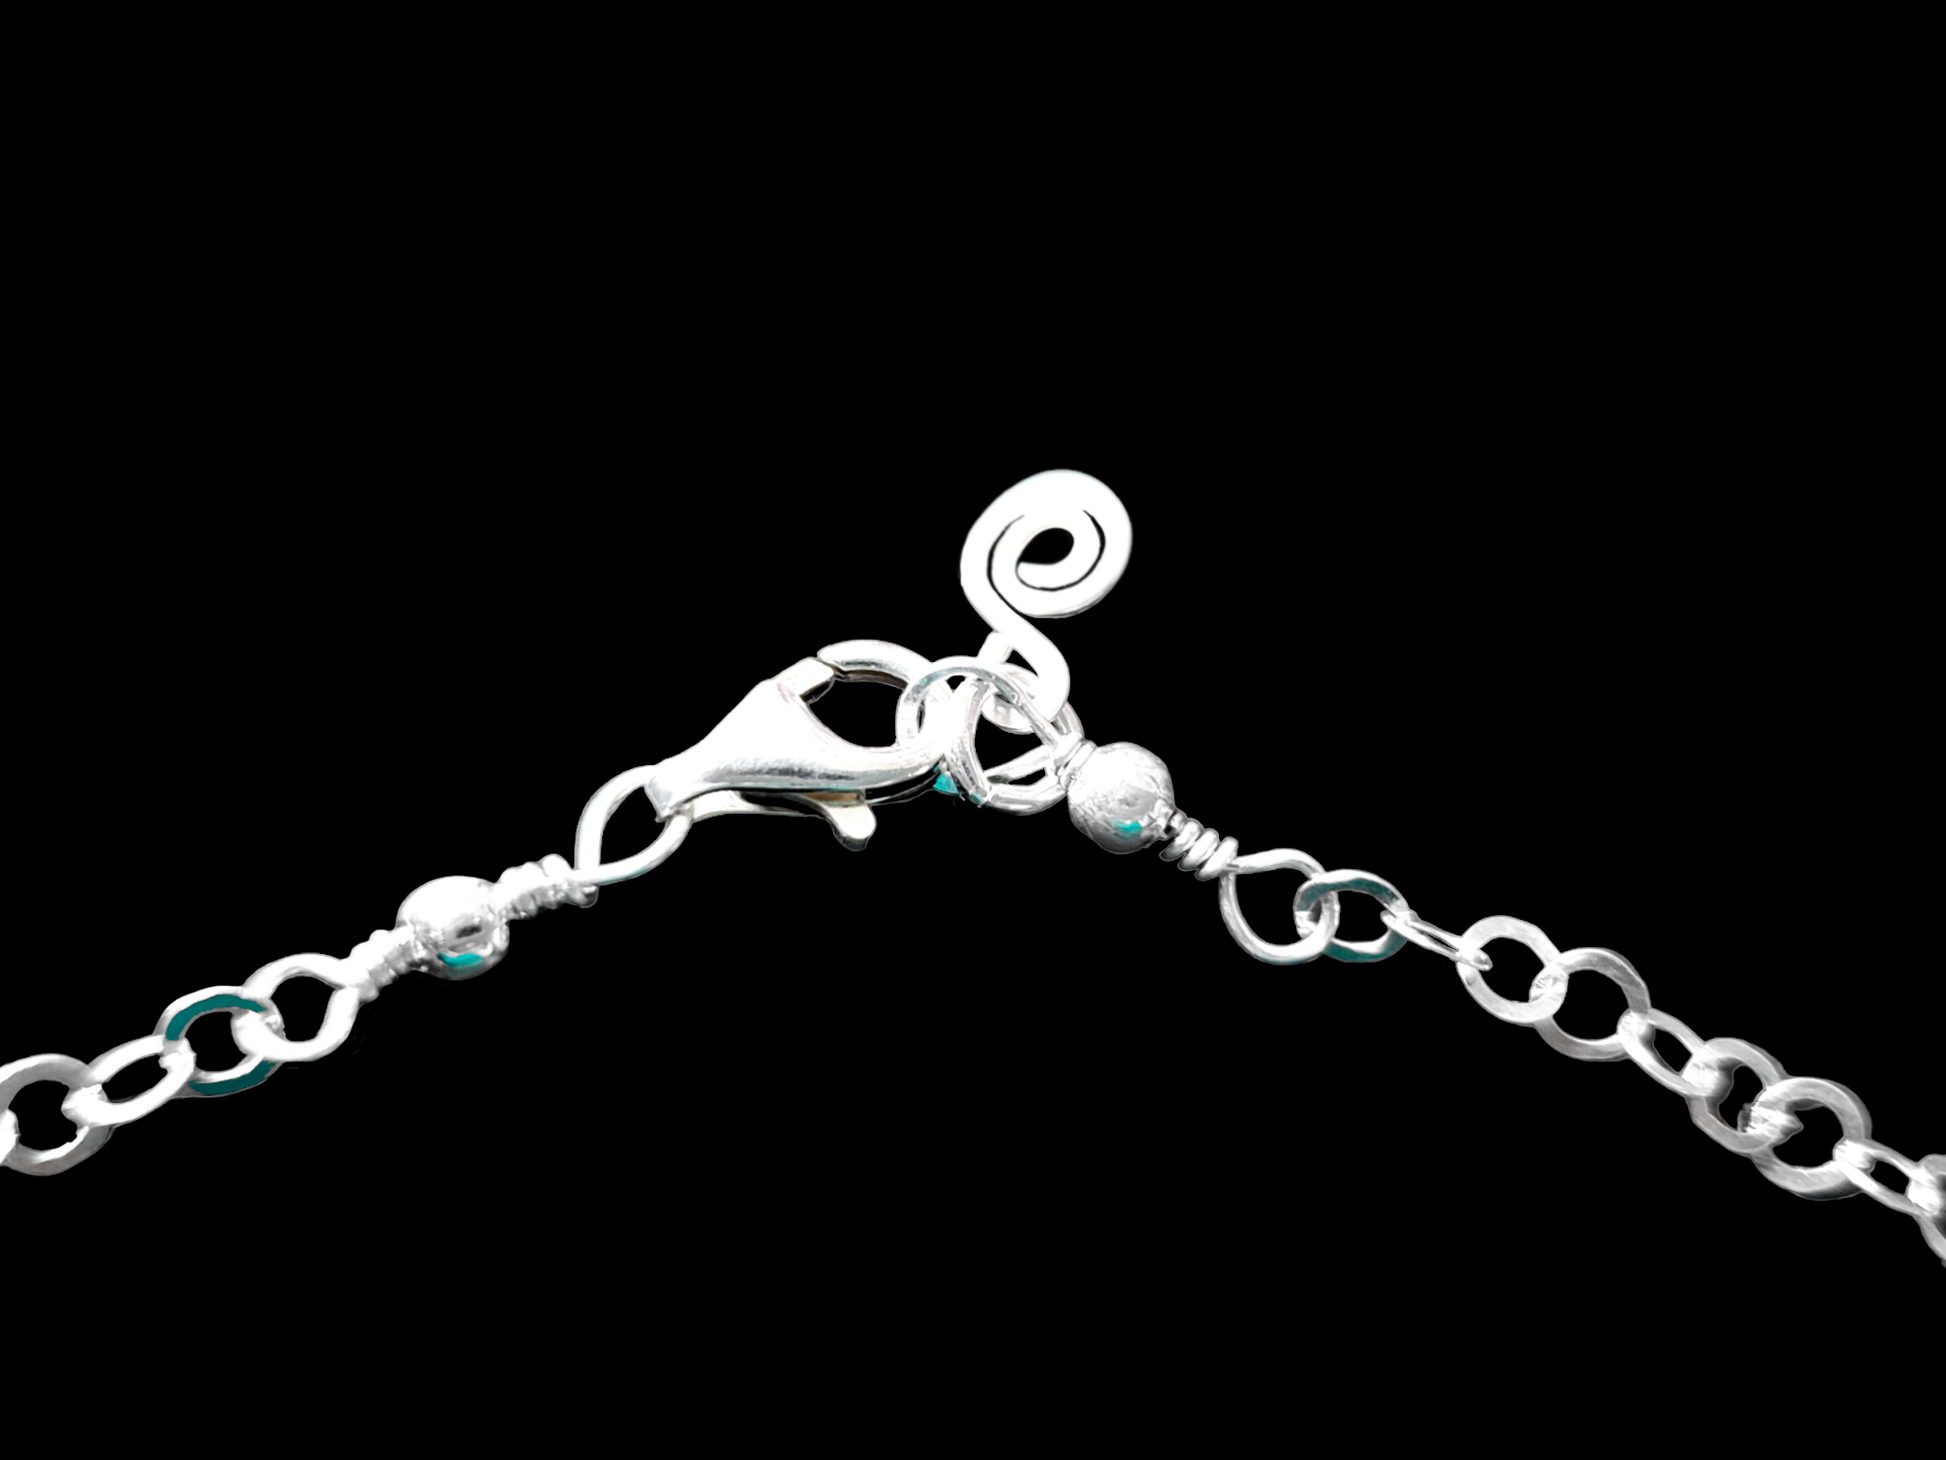 Anklet Clasp with Lobter Claw and Eternity Coil pendant, on black background